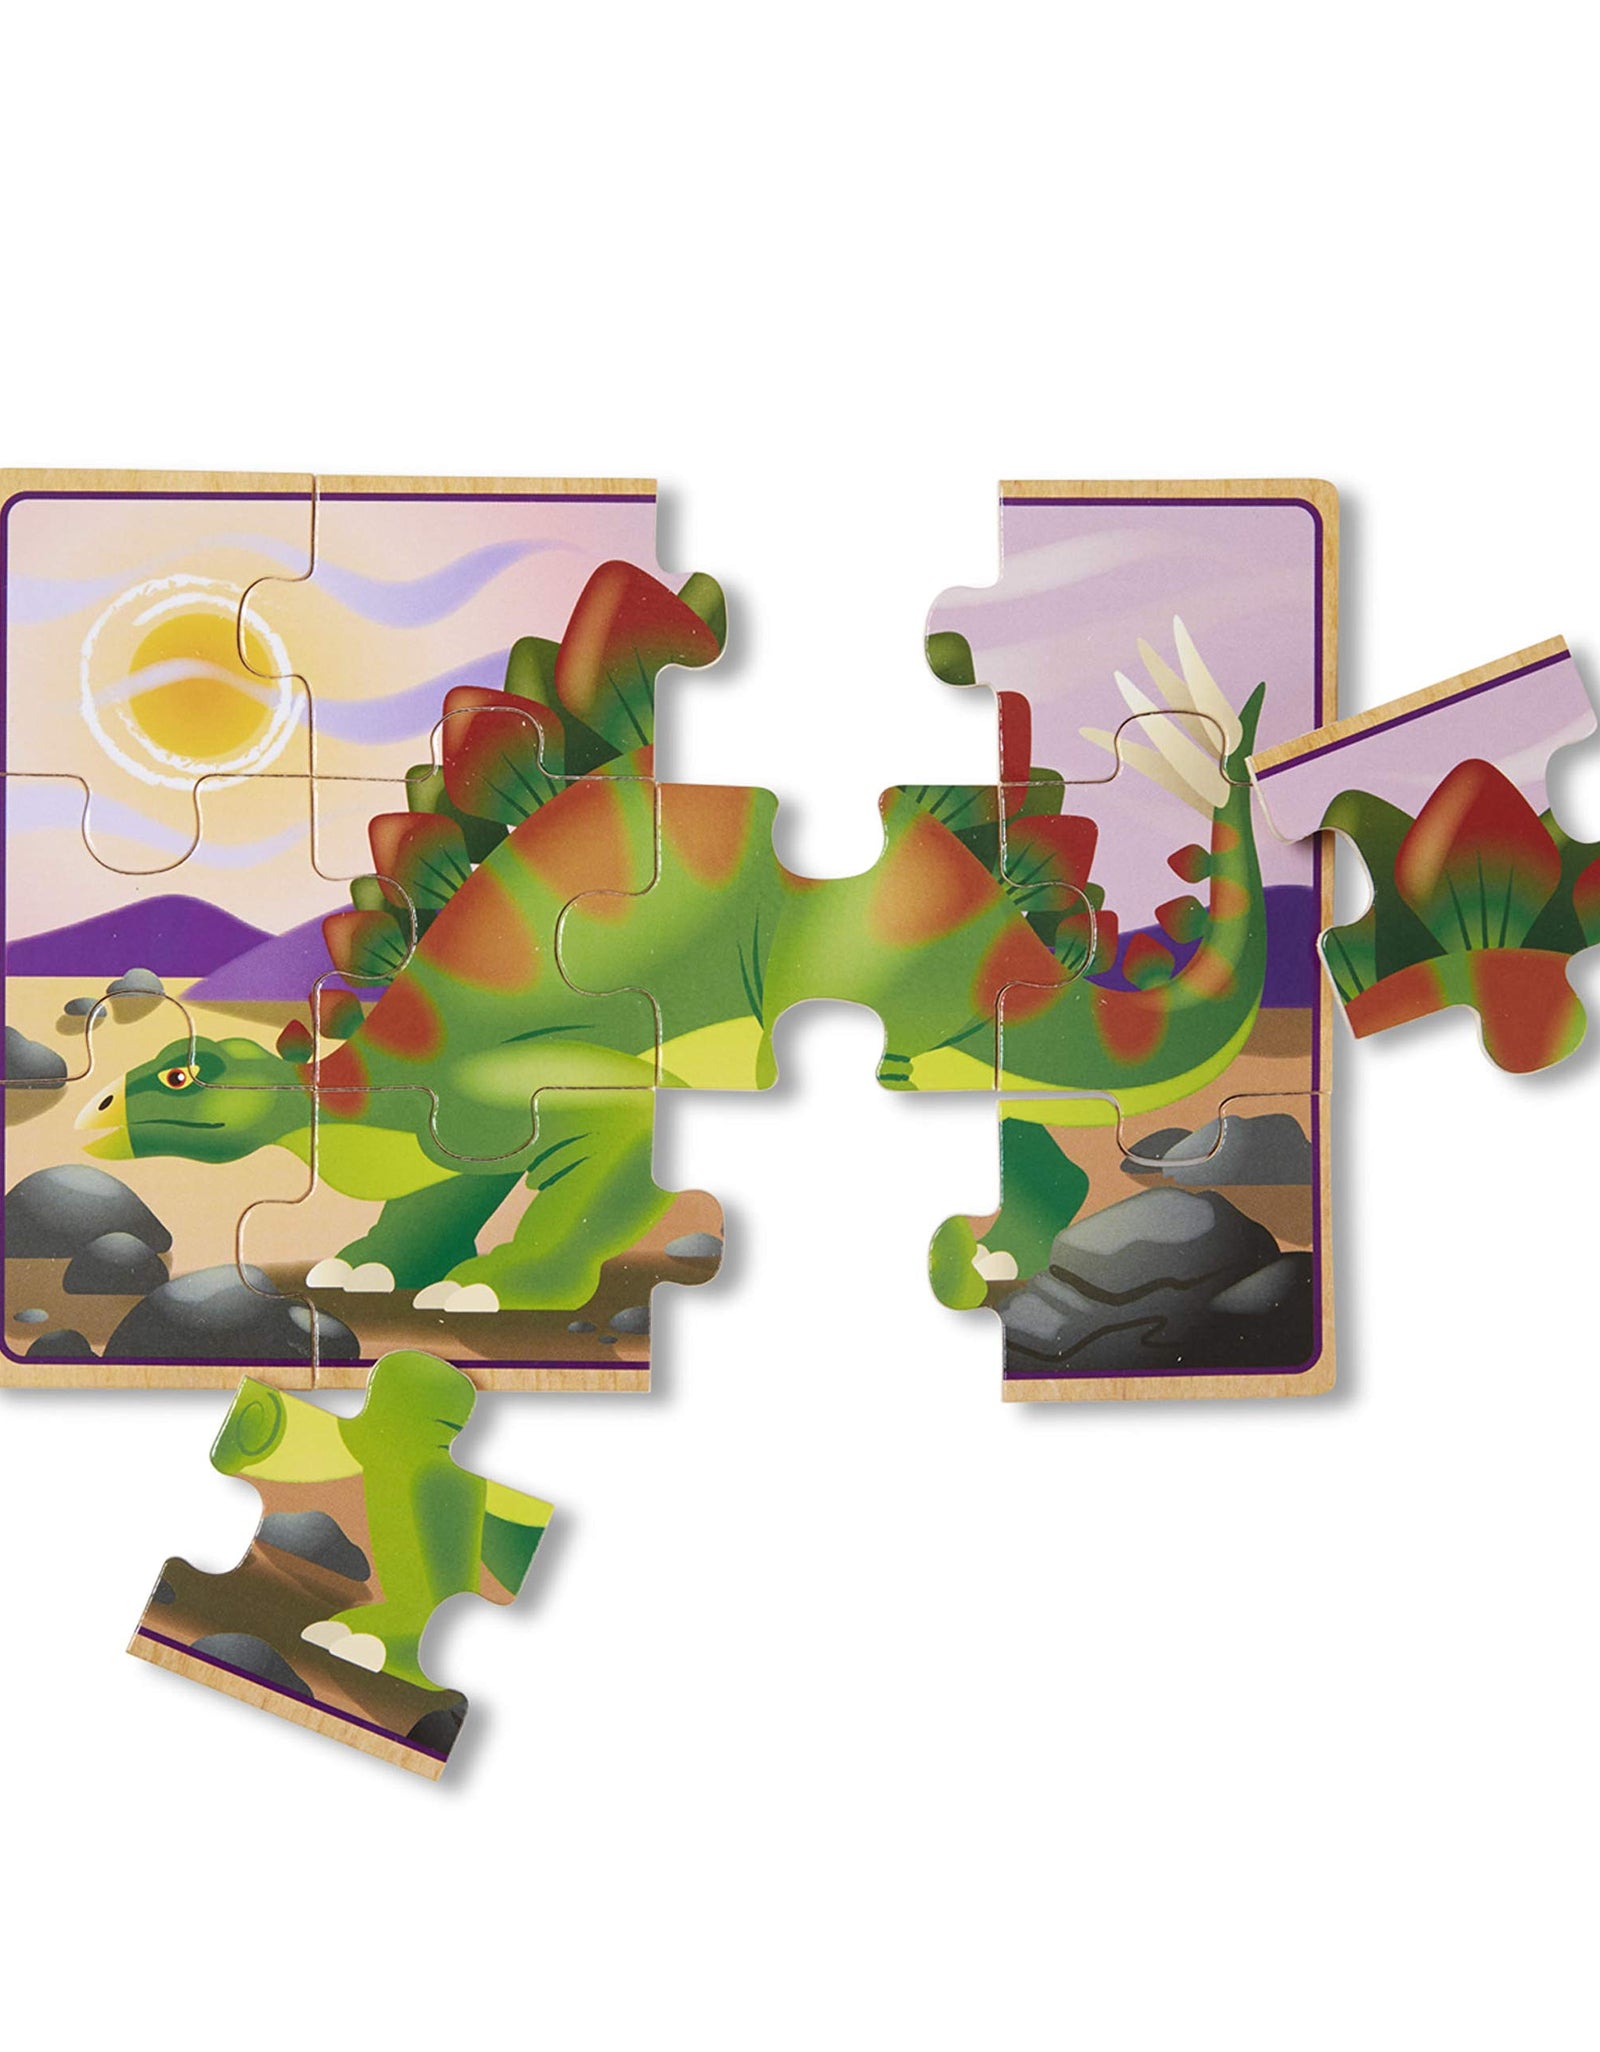 Melissa & Doug Dinosaurs 4-in-1 Wooden Jigsaw Puzzles in a Storage Box (48 pcs)